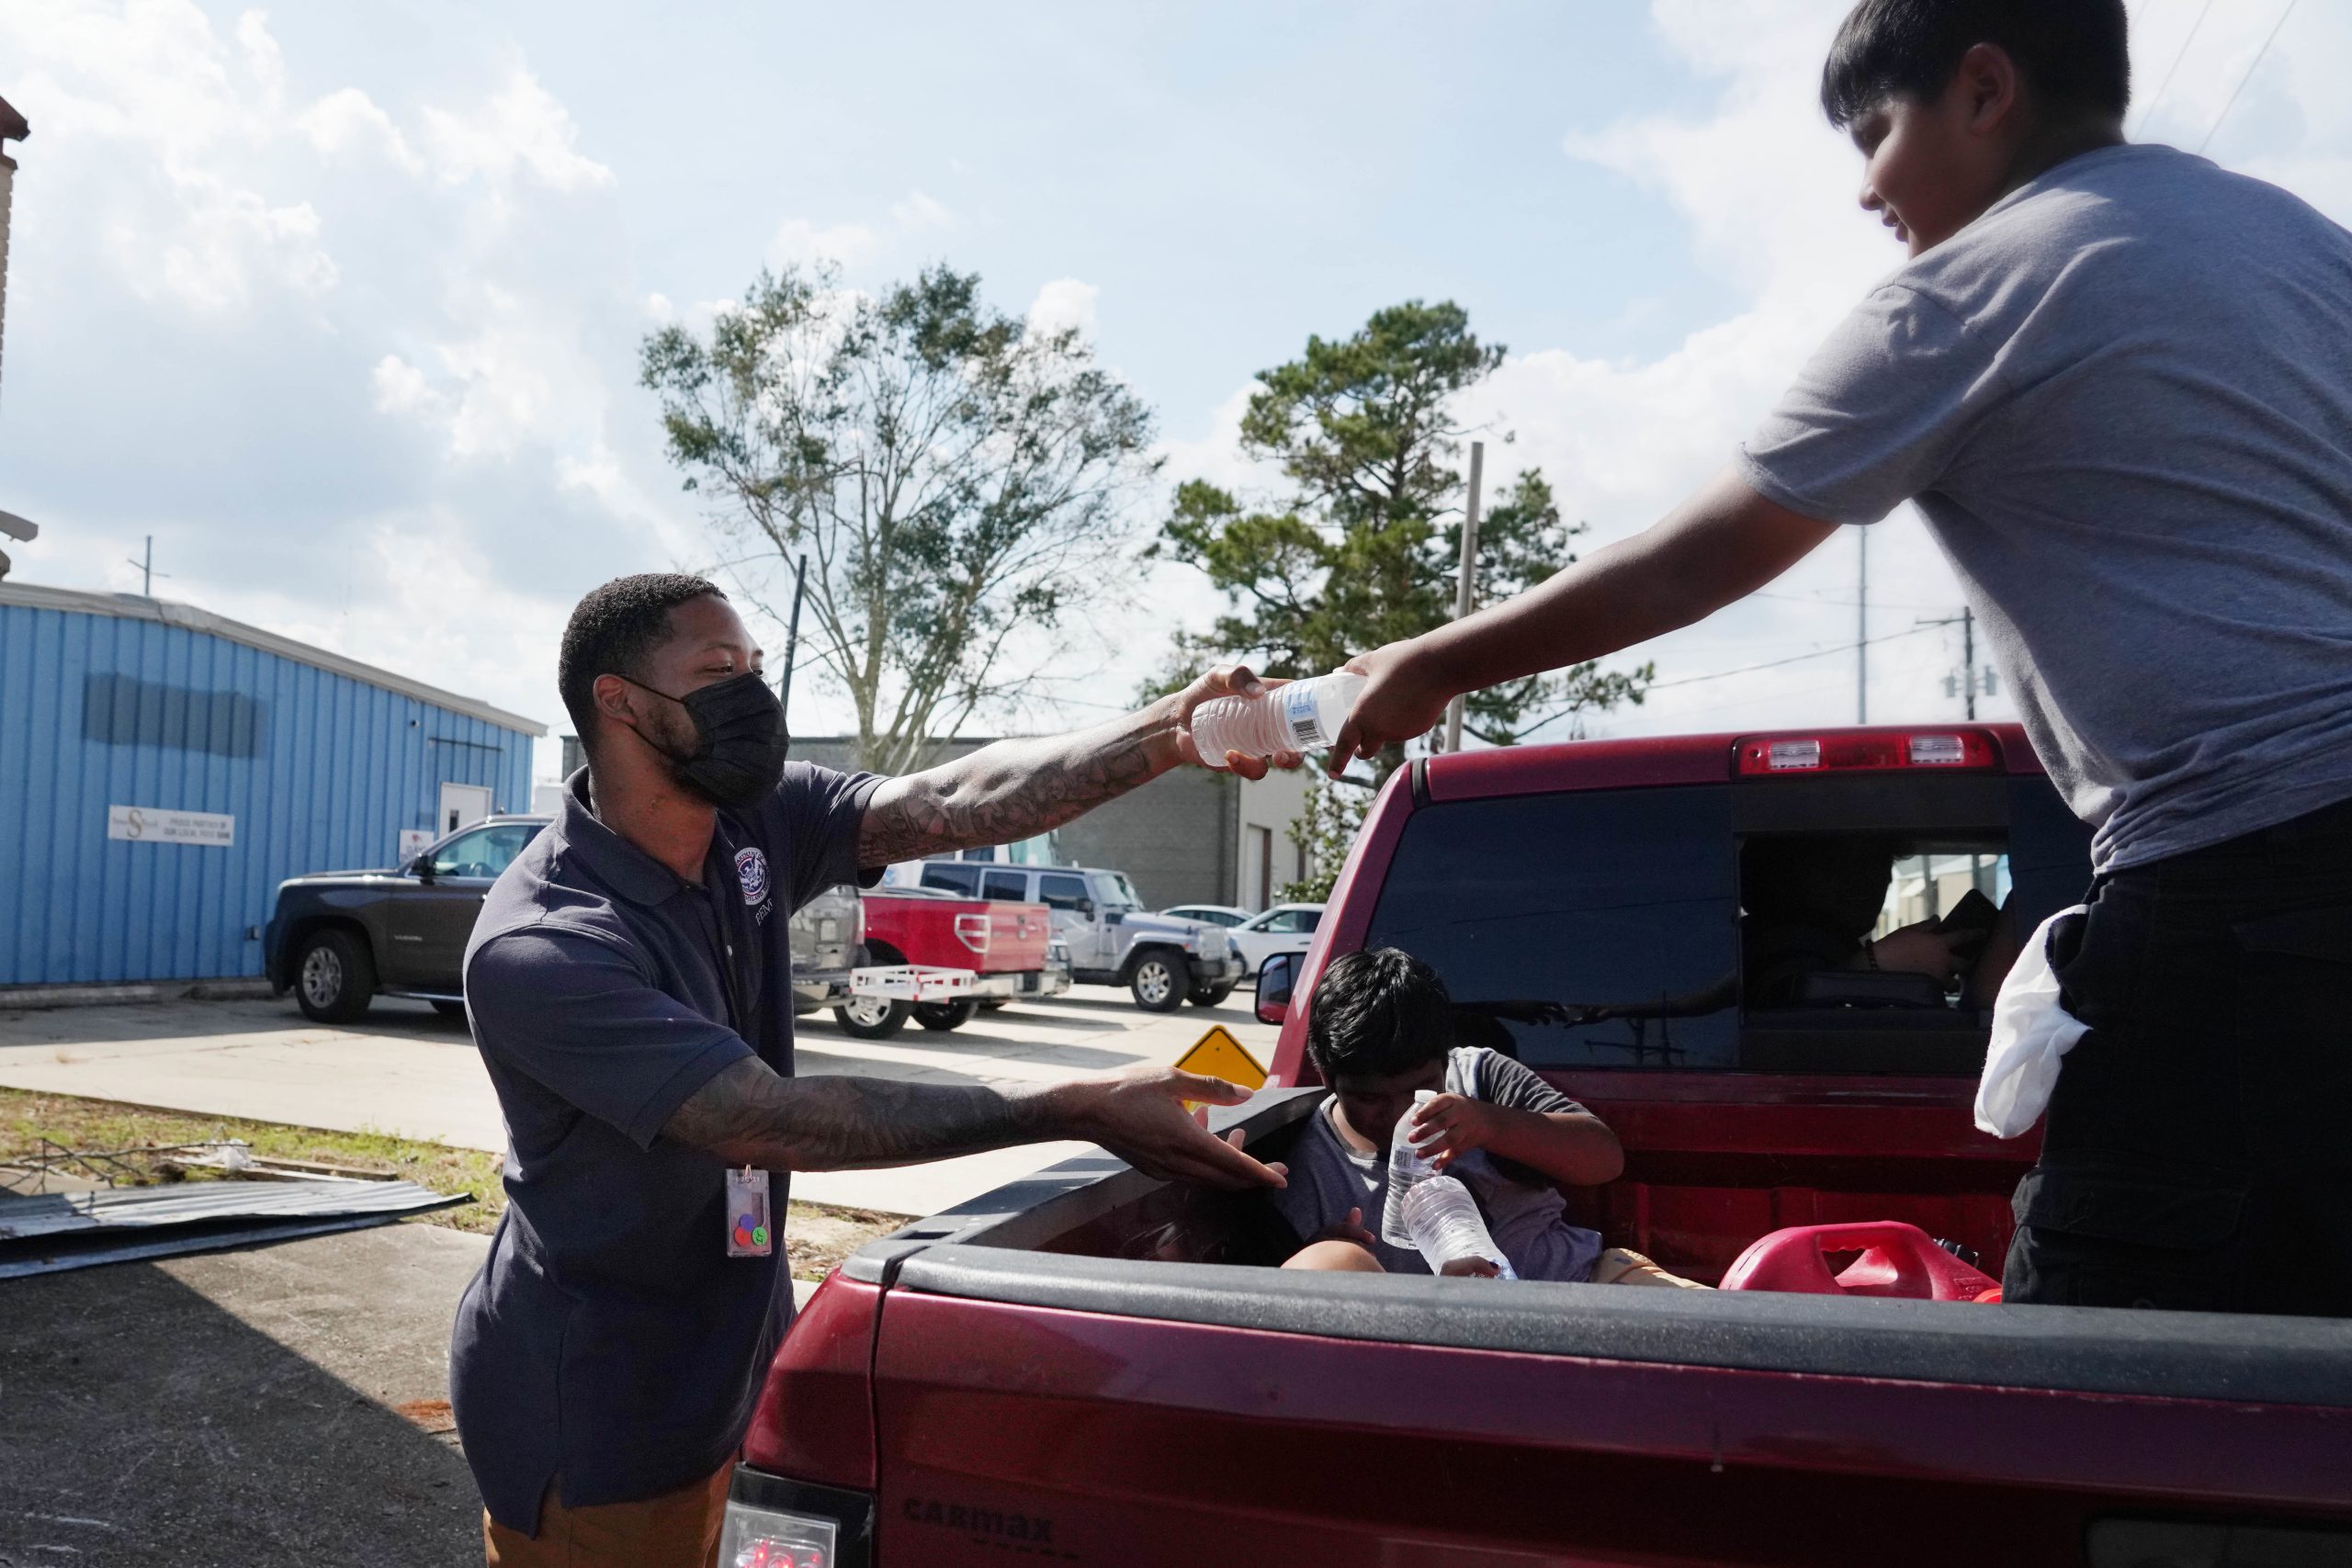 Veterans and their families in regions affected by hurricanes Fiona and Ian can access VA resources and benefits to get the support they need after a natural disaster.